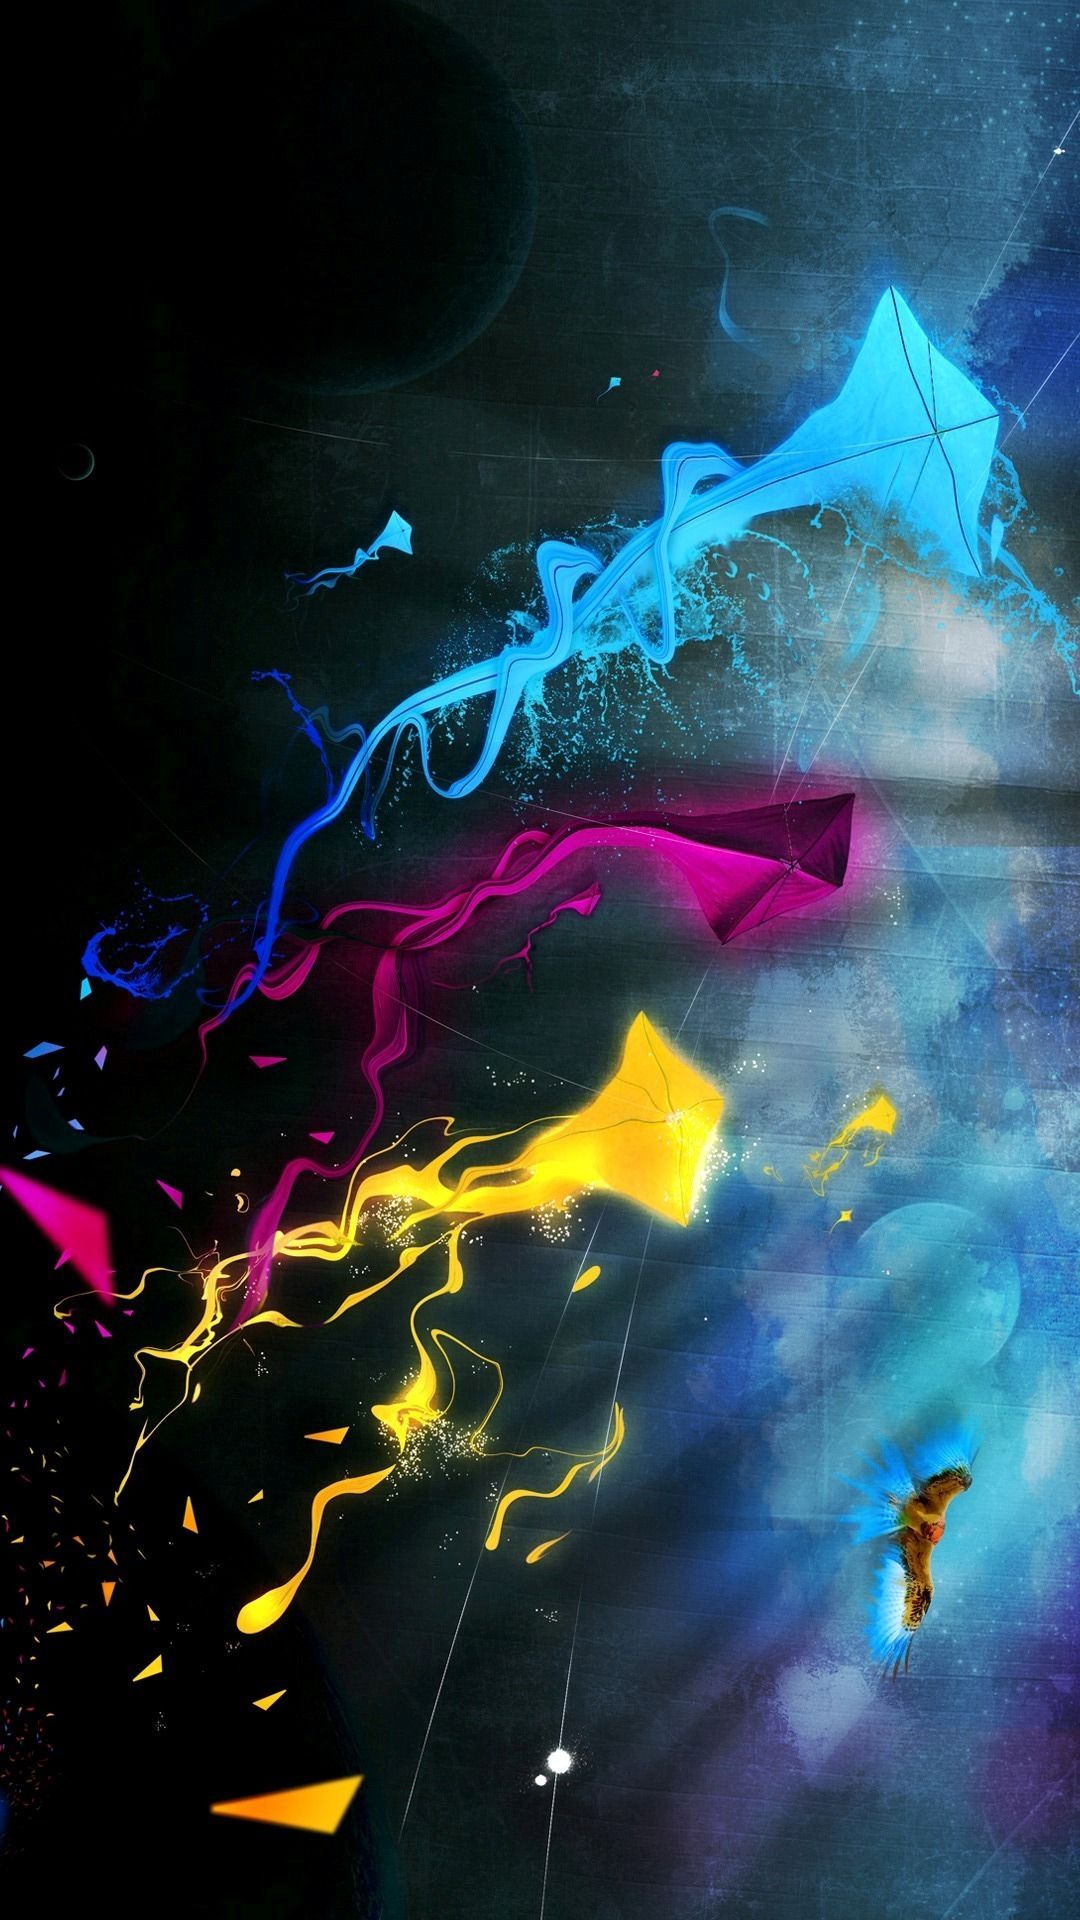 Hd Wallpaper For Mobile Cool